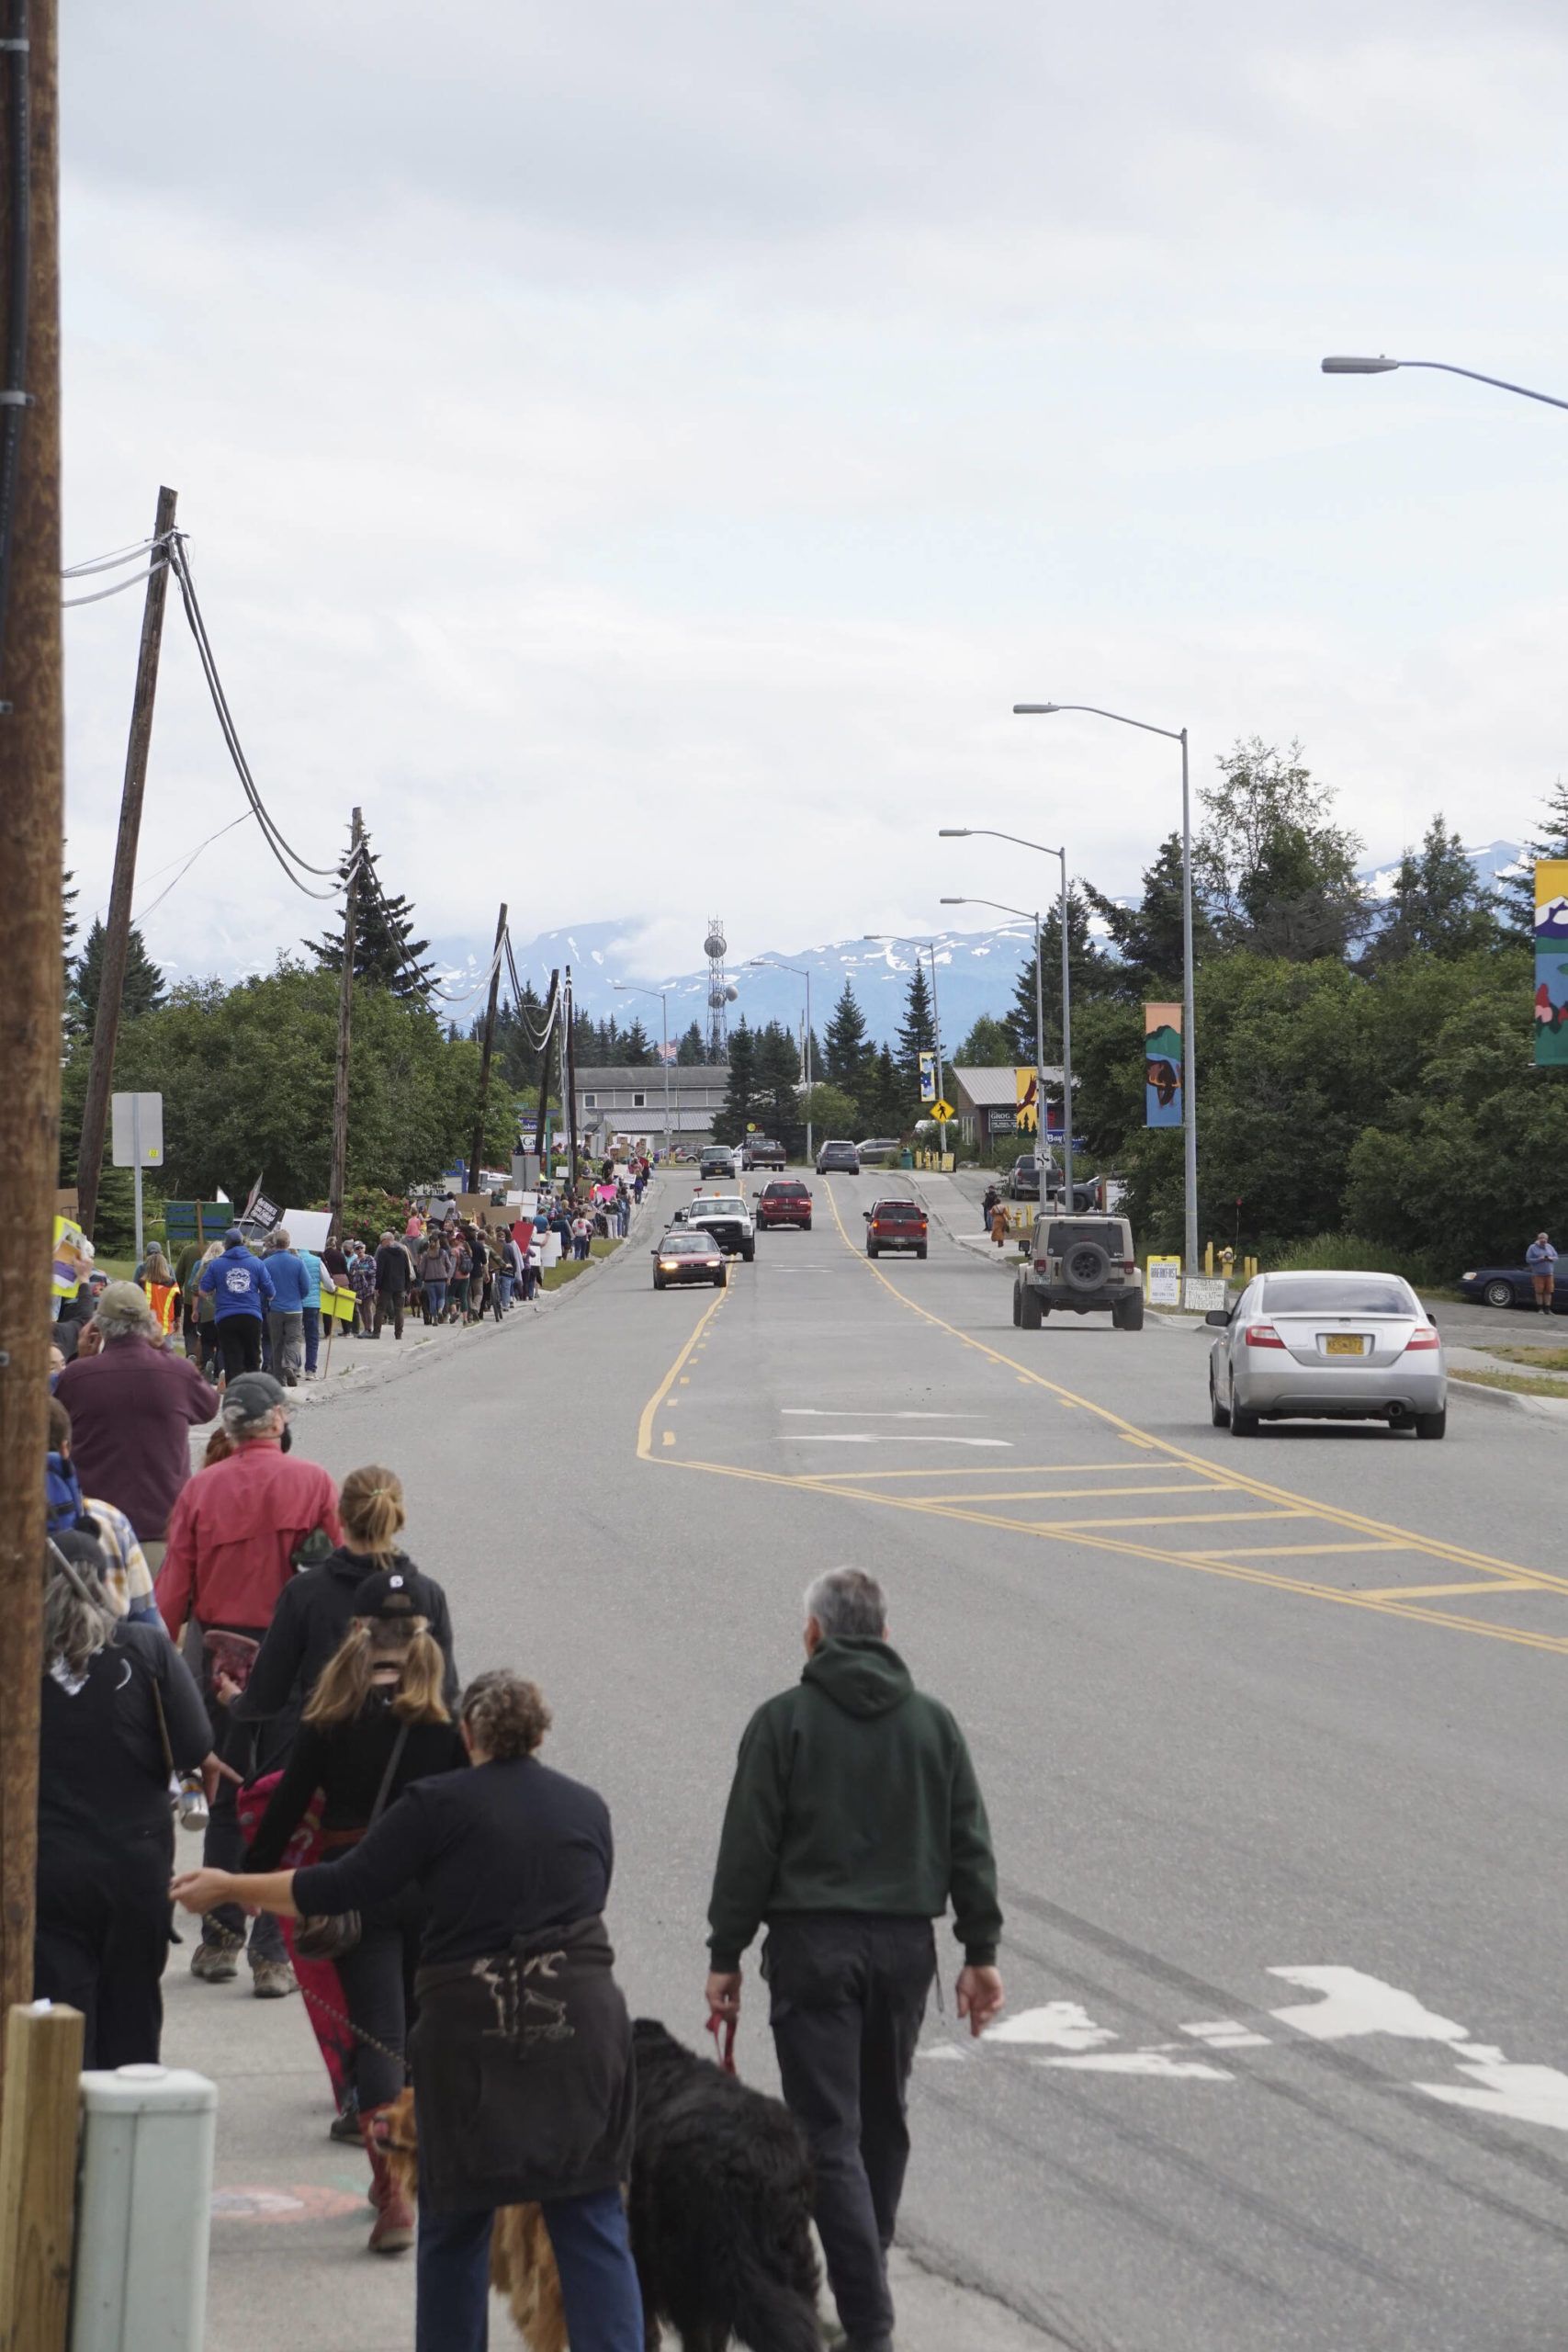 A group of about 400 people march along Pioneer Avenue for the "Women's March: Bans Off Our Bodies" protest on Saturday, July 9, 2022, in Homer, Alaska. The line of marchers stretched from about Main Street to Kachemak Way (Photo by Michael Armstrong/Homer News)